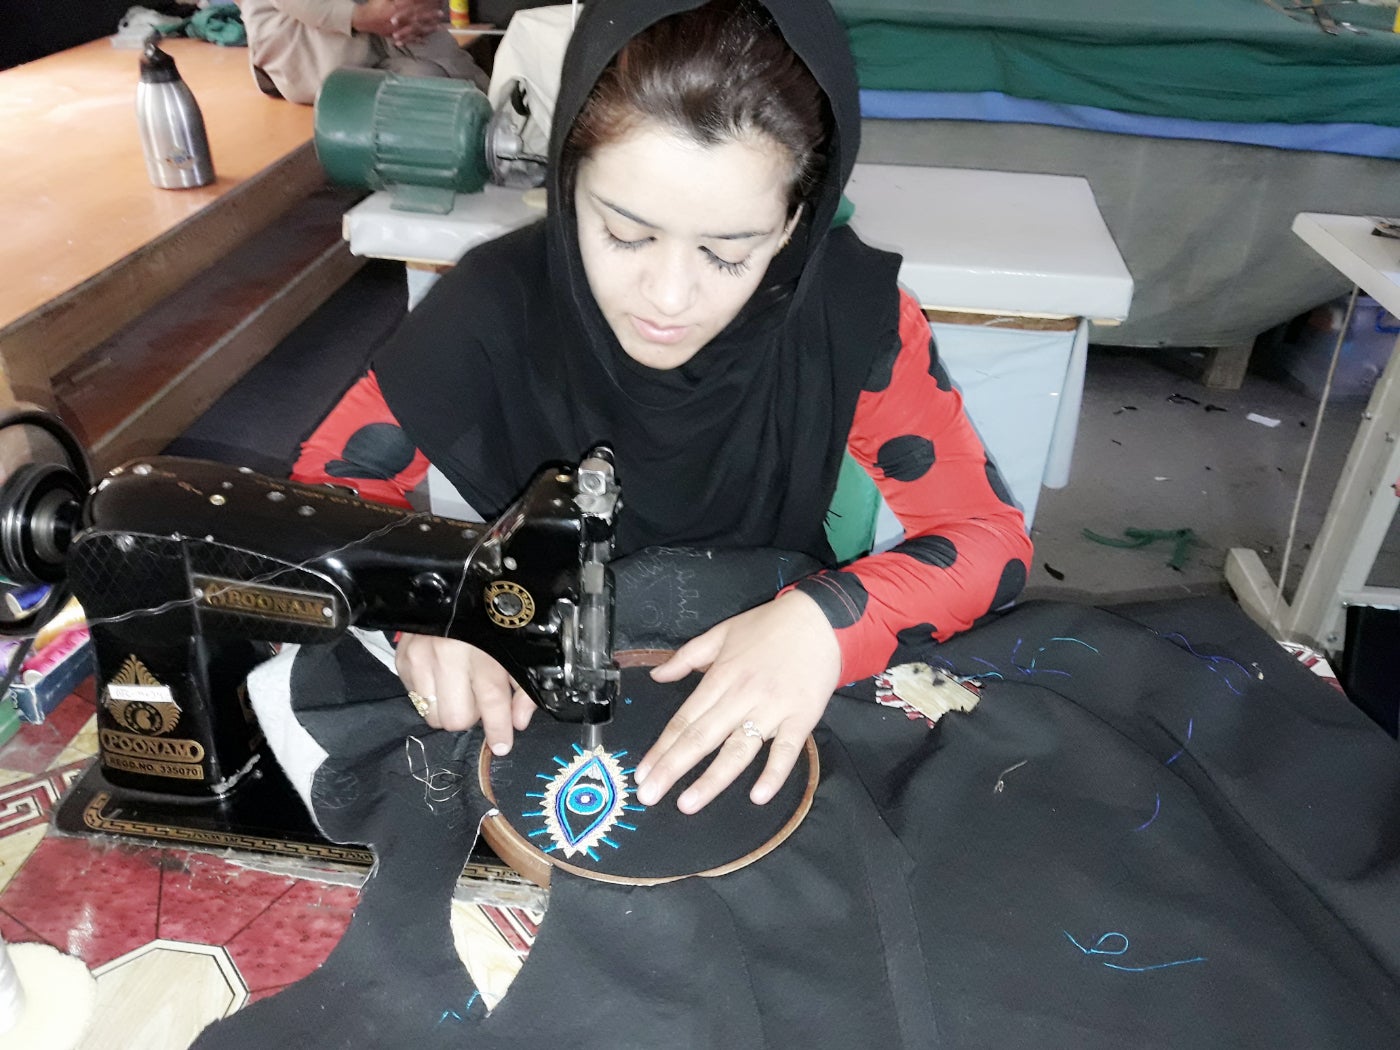 Afghan woman making embroidered patches